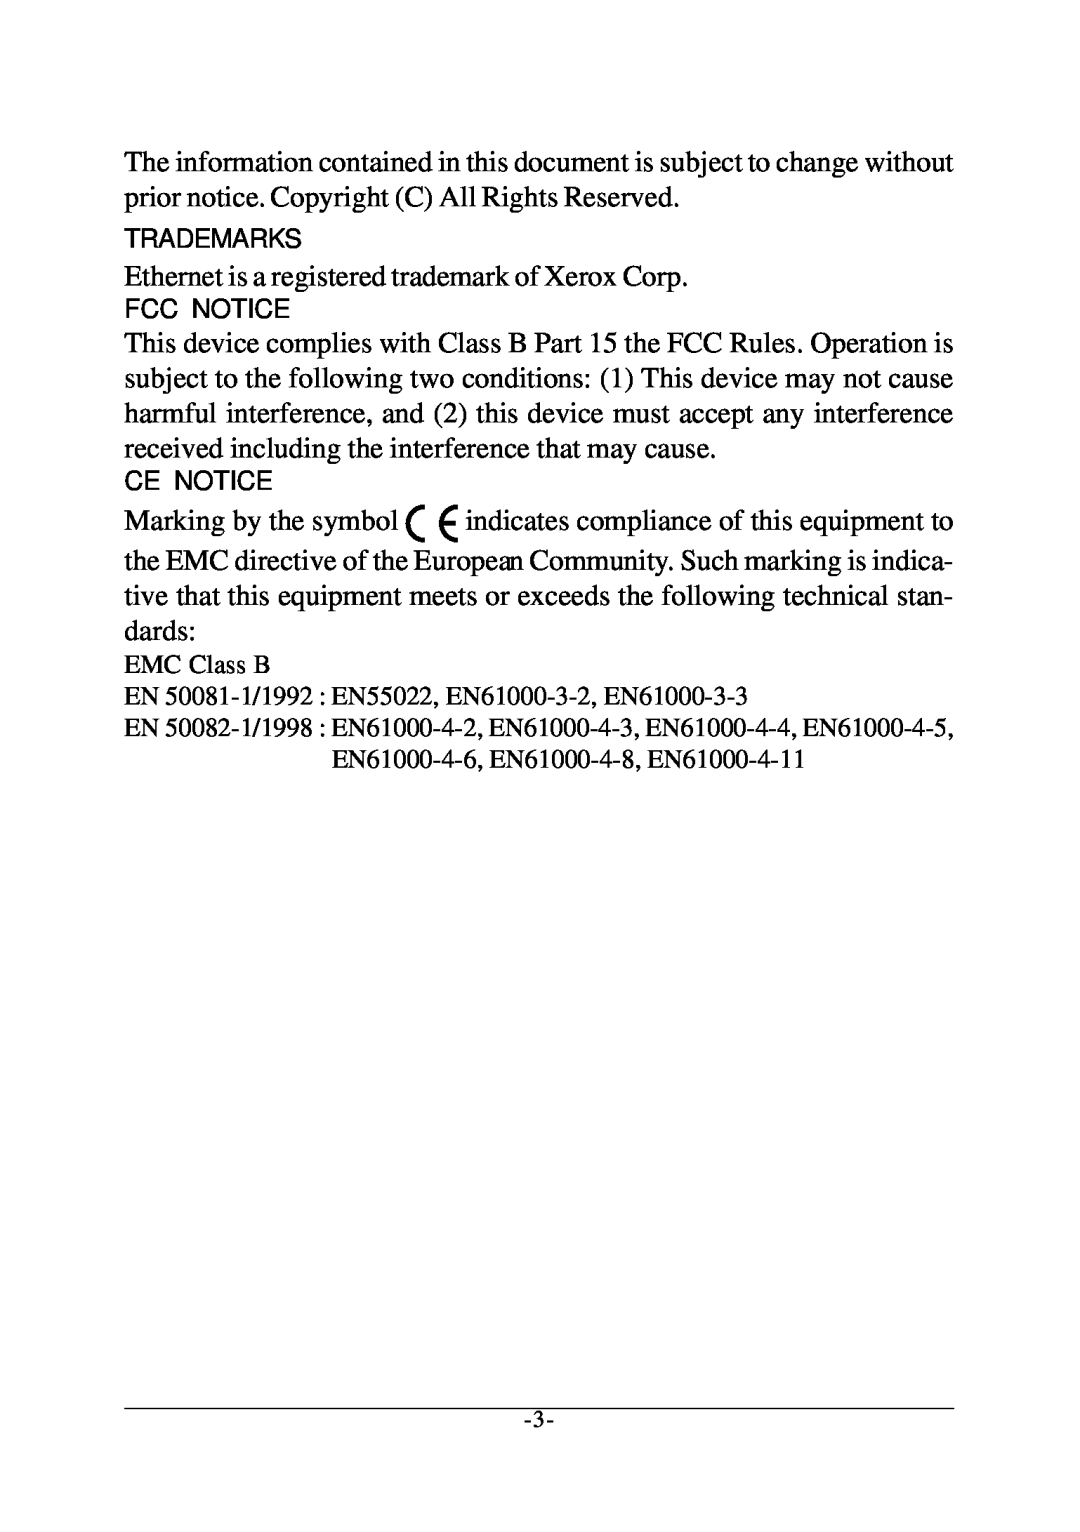 KTI Networks KC-300D manual Ethernet is a registered trademark of Xerox Corp 